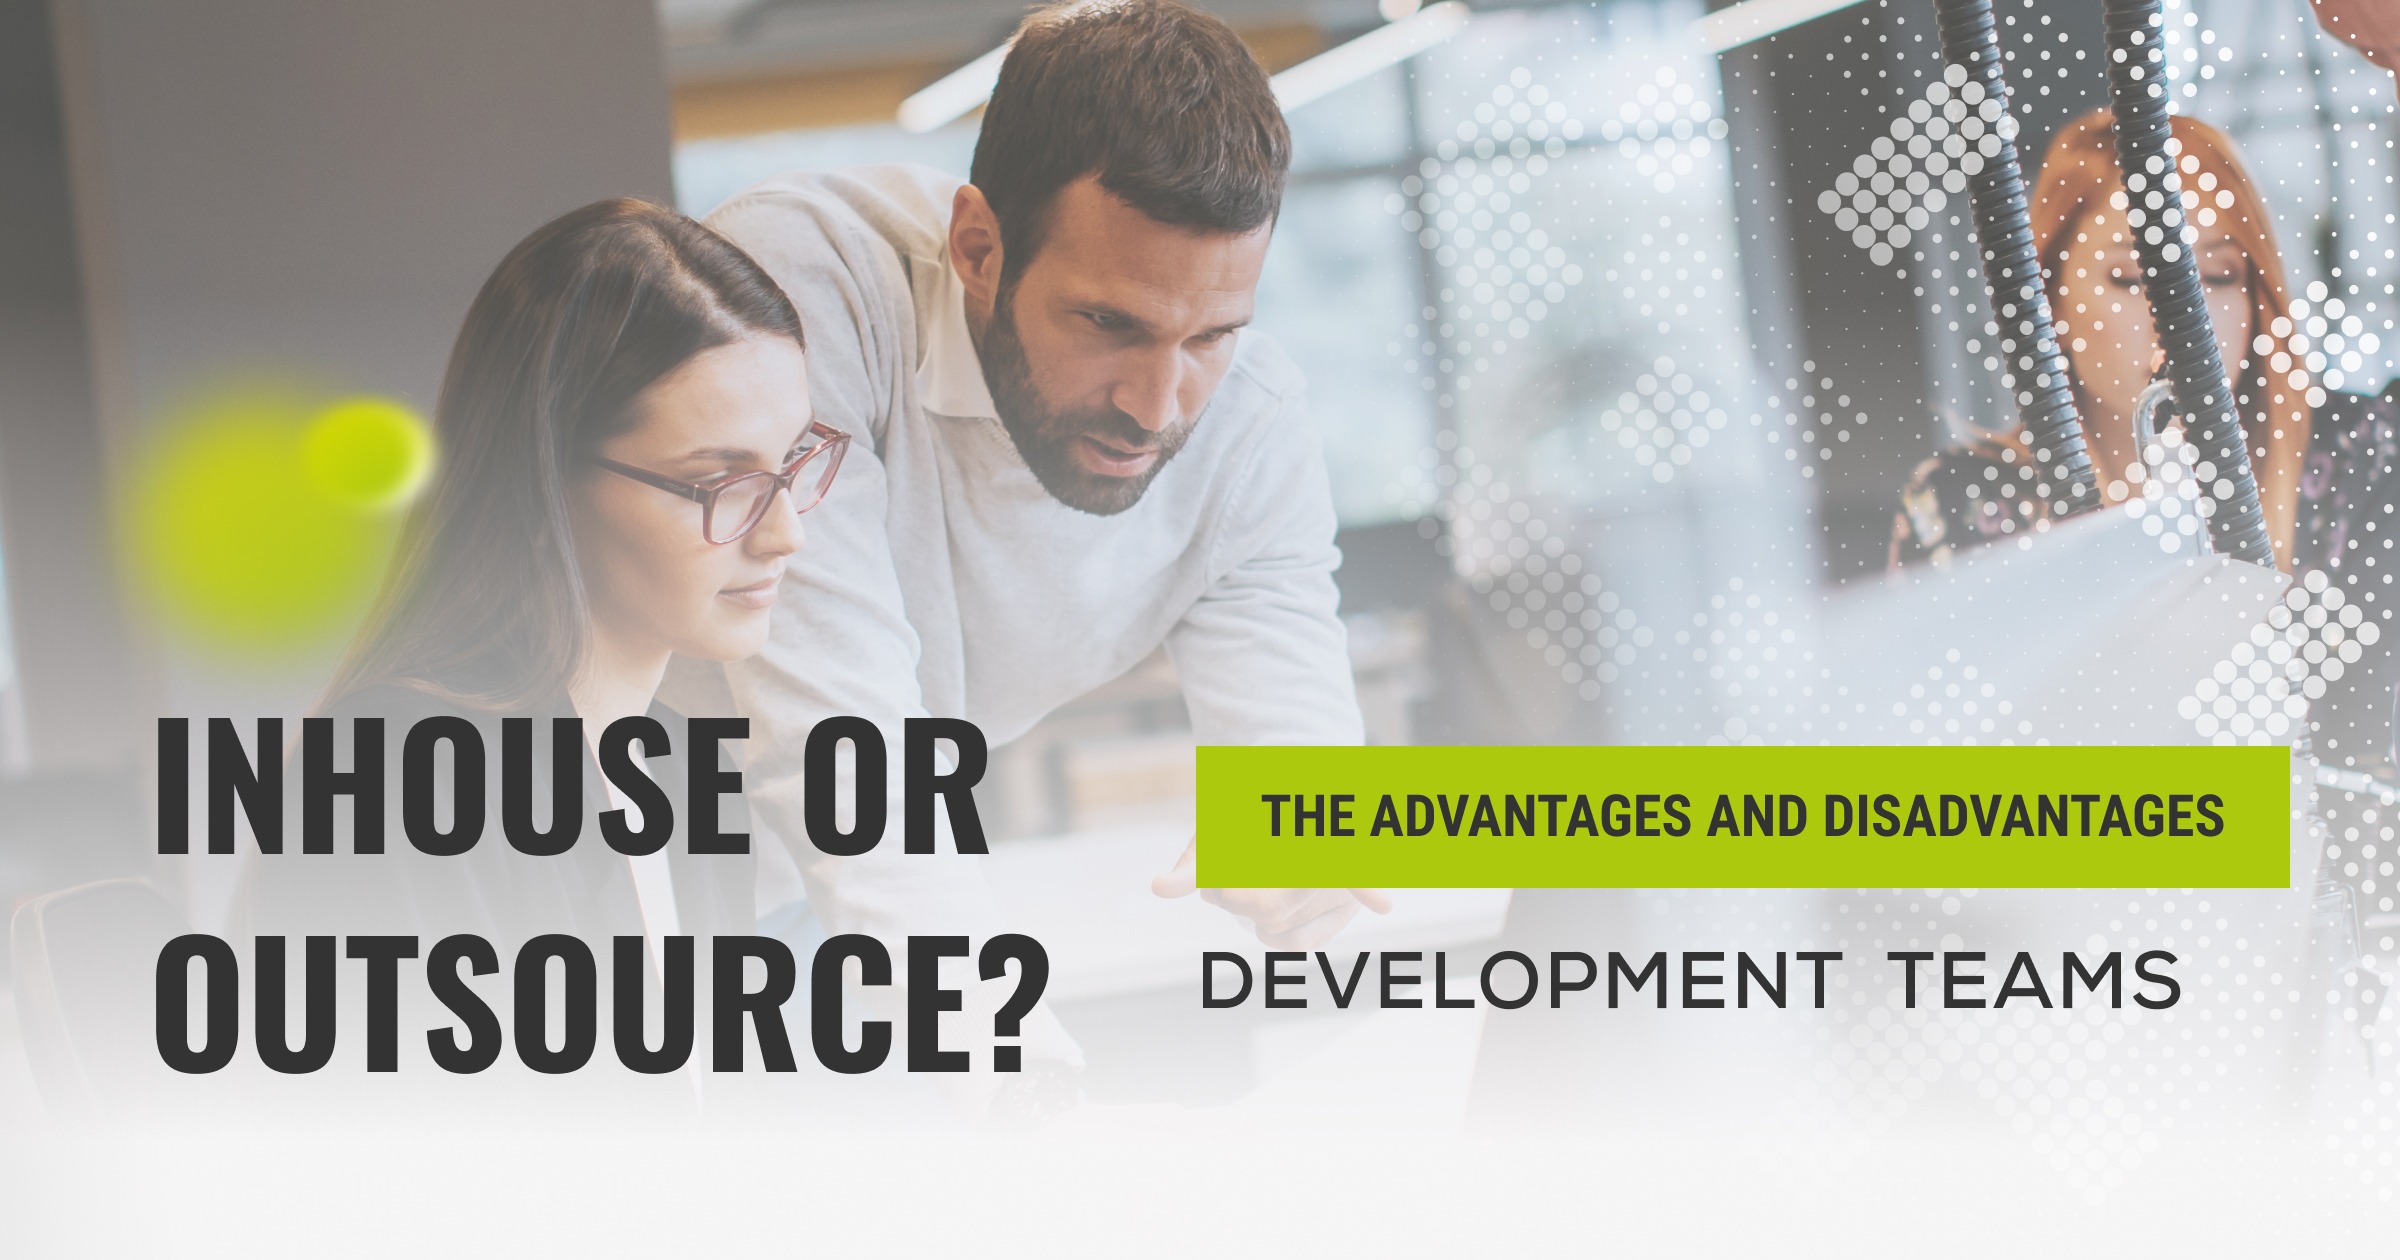 To Inhouse or Outsource? The Pros and Cons of Development Teams